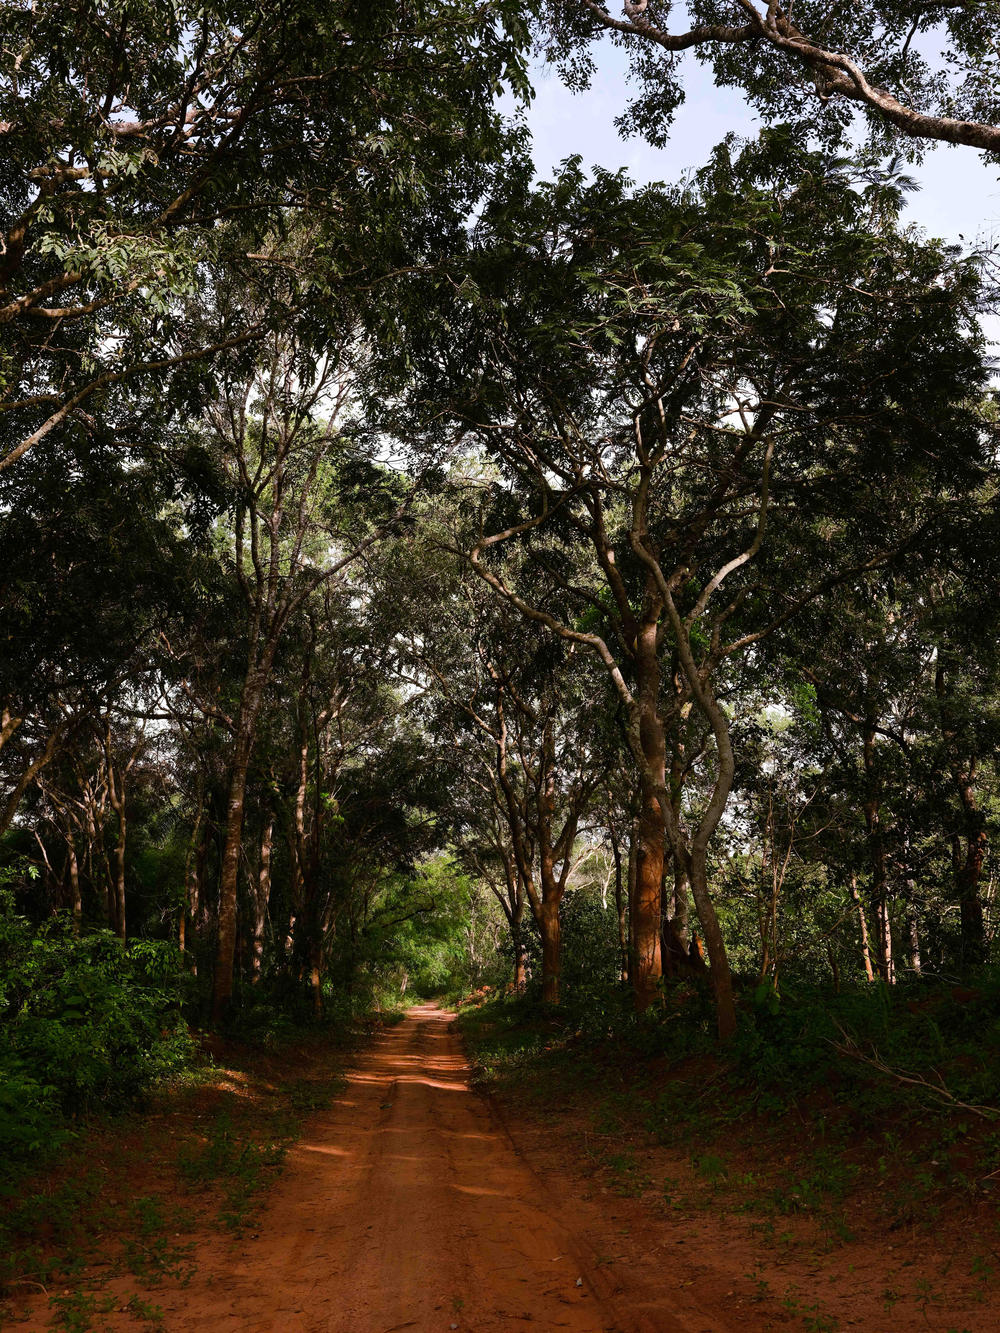 The road leading to the village of Cobiana, Guinea-Bissau, which is home to a sacred forest, on Sept. 11, 2019.